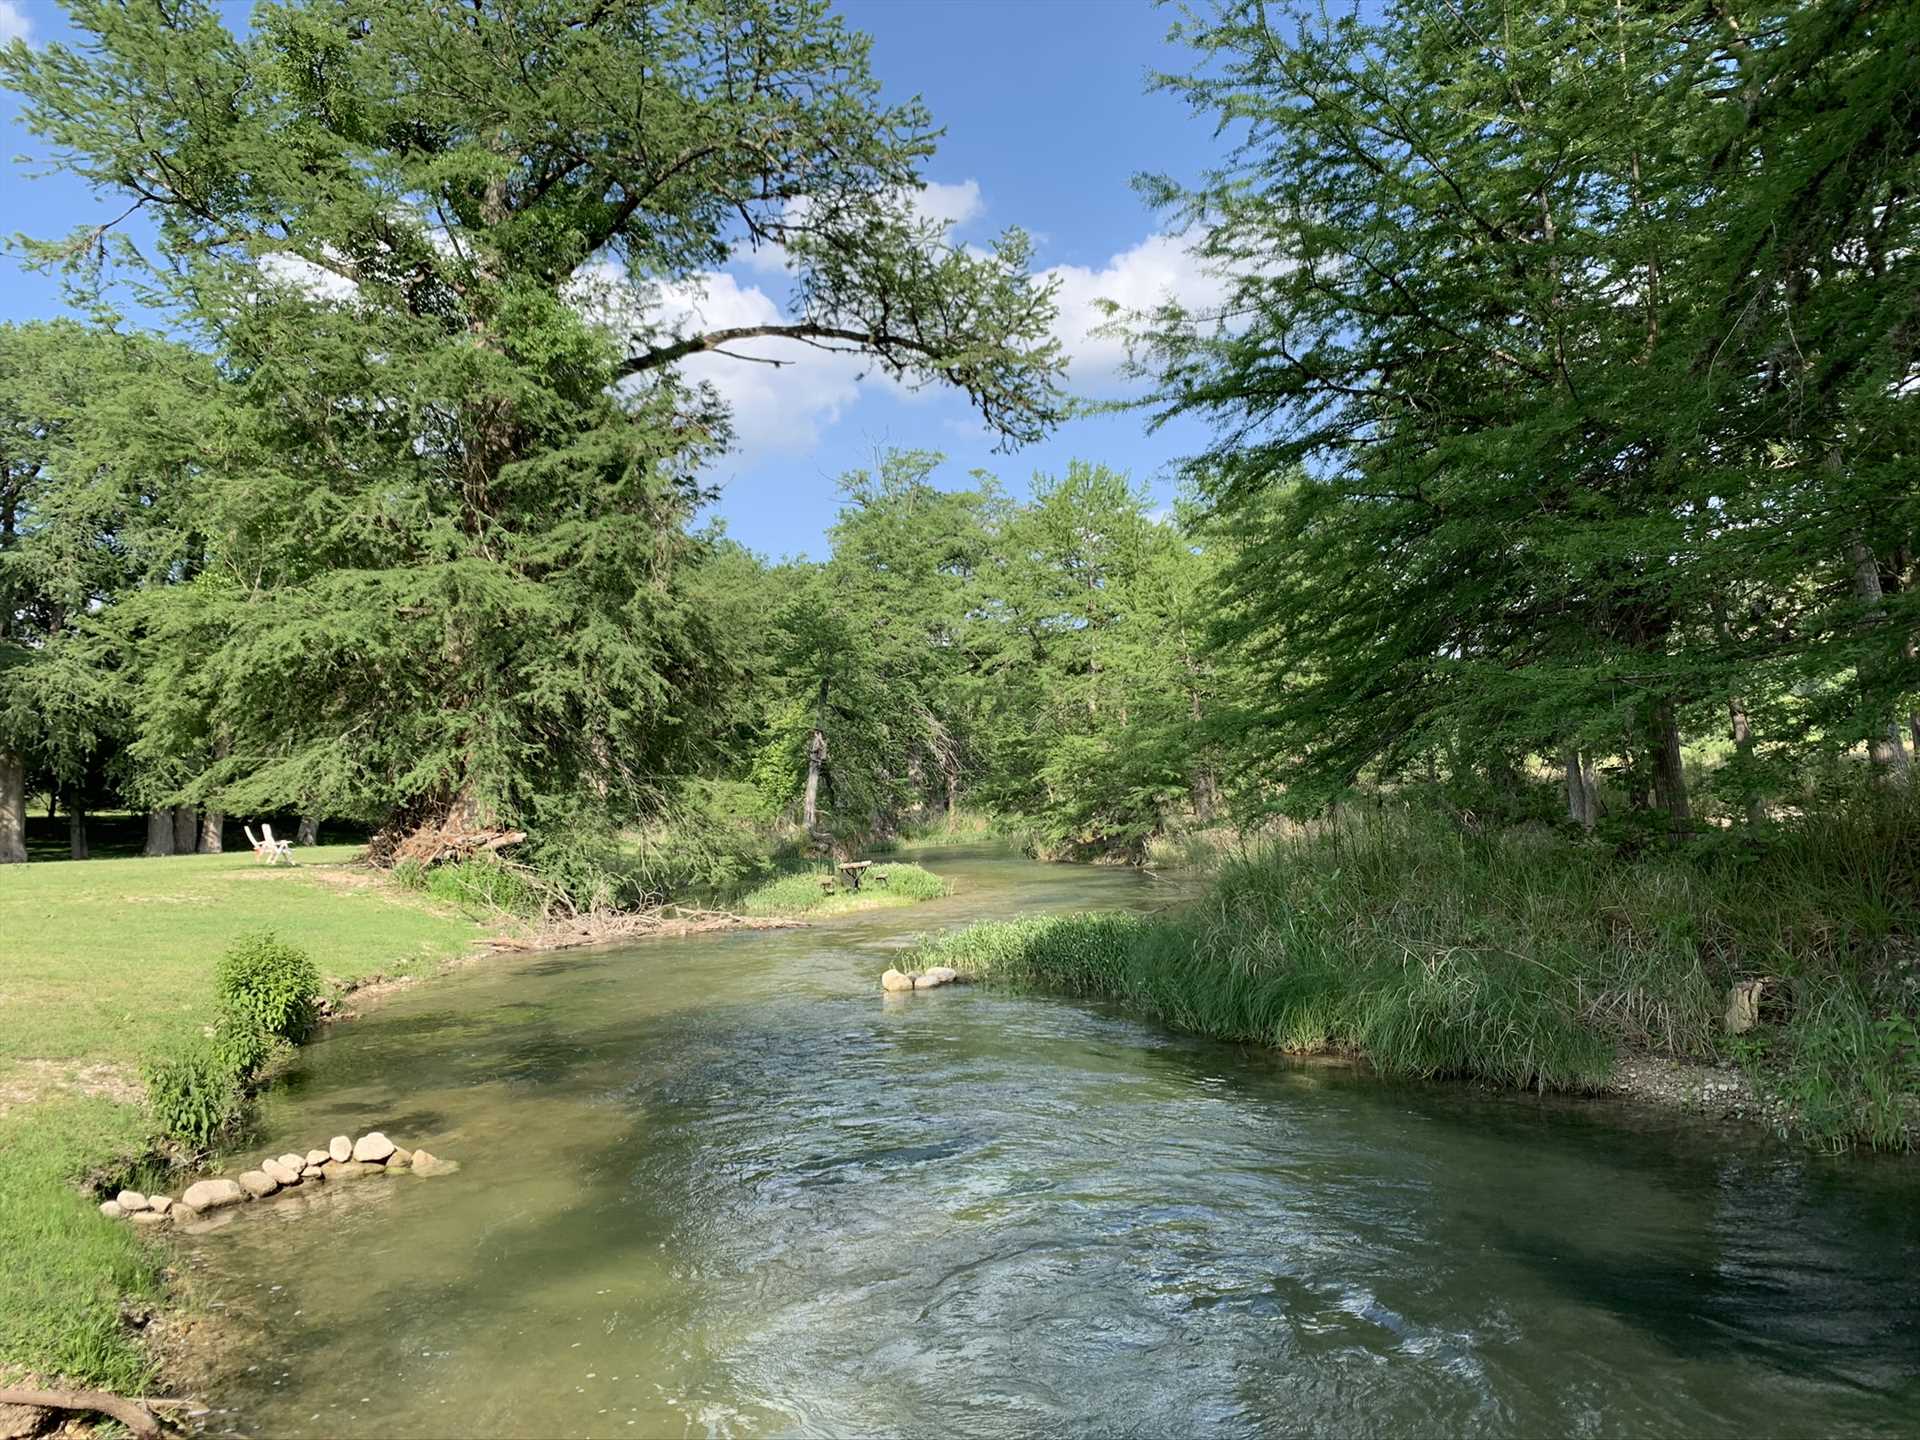                                                 Your immediate access to the Guadalupe River is shared with two other cabins, but there's plenty of room for both privacy and making new friends.